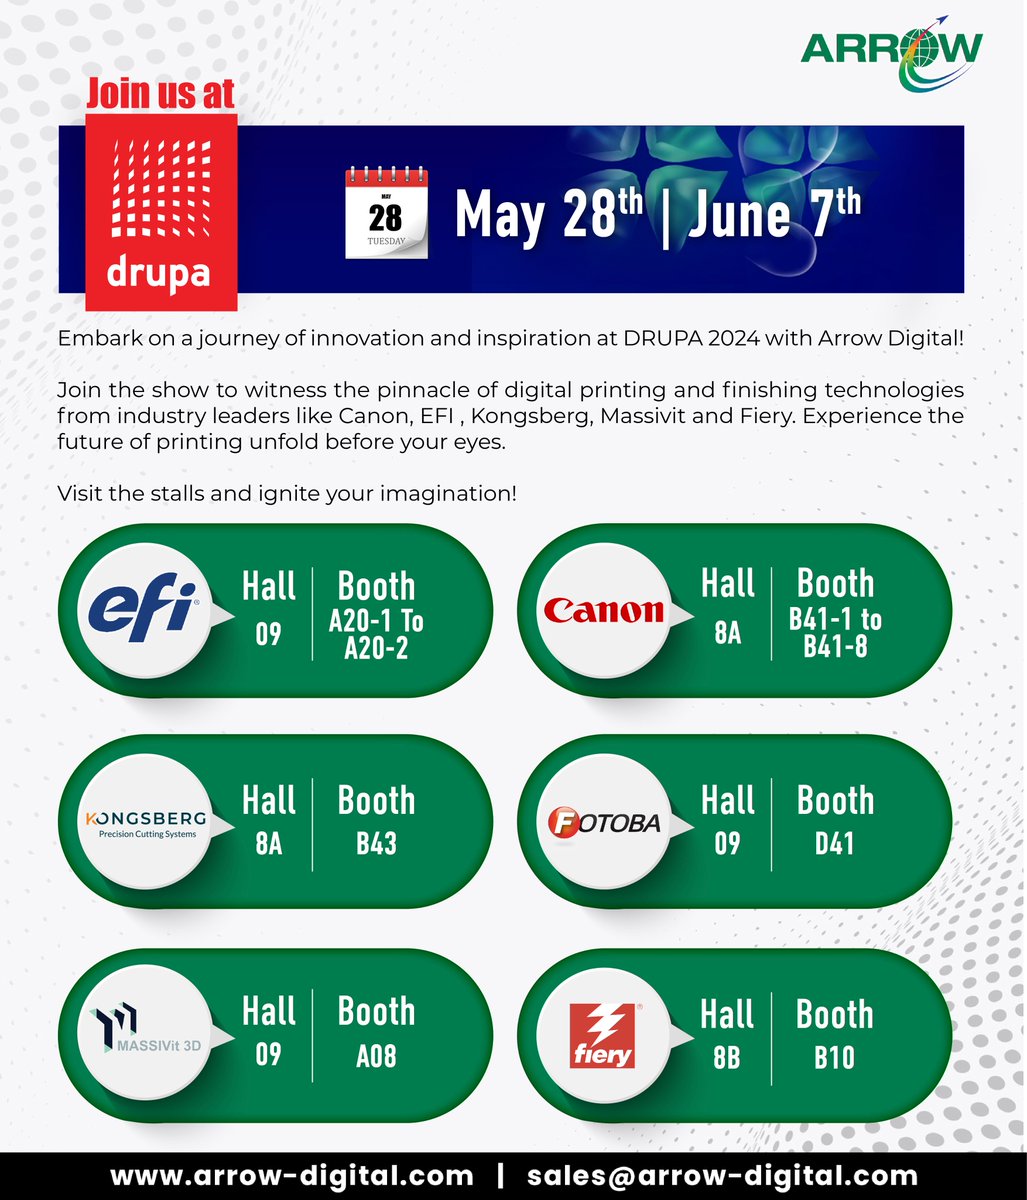 See you at EFI Hall 09 Booth A20 - 1 to A20-2, Canon Hall 8A Booth B41-1 to B41 - 8, Kongsberg Hall 8A Booth B43, Fotoba Hall 09 Booth D41, Massivit 3D Hall 09 Booth A 08, and Fiery Hall 8B Booth B10. Don't miss out on DRUPA 2024, Germany, from May 28 to June 7!

#ArrowDigital